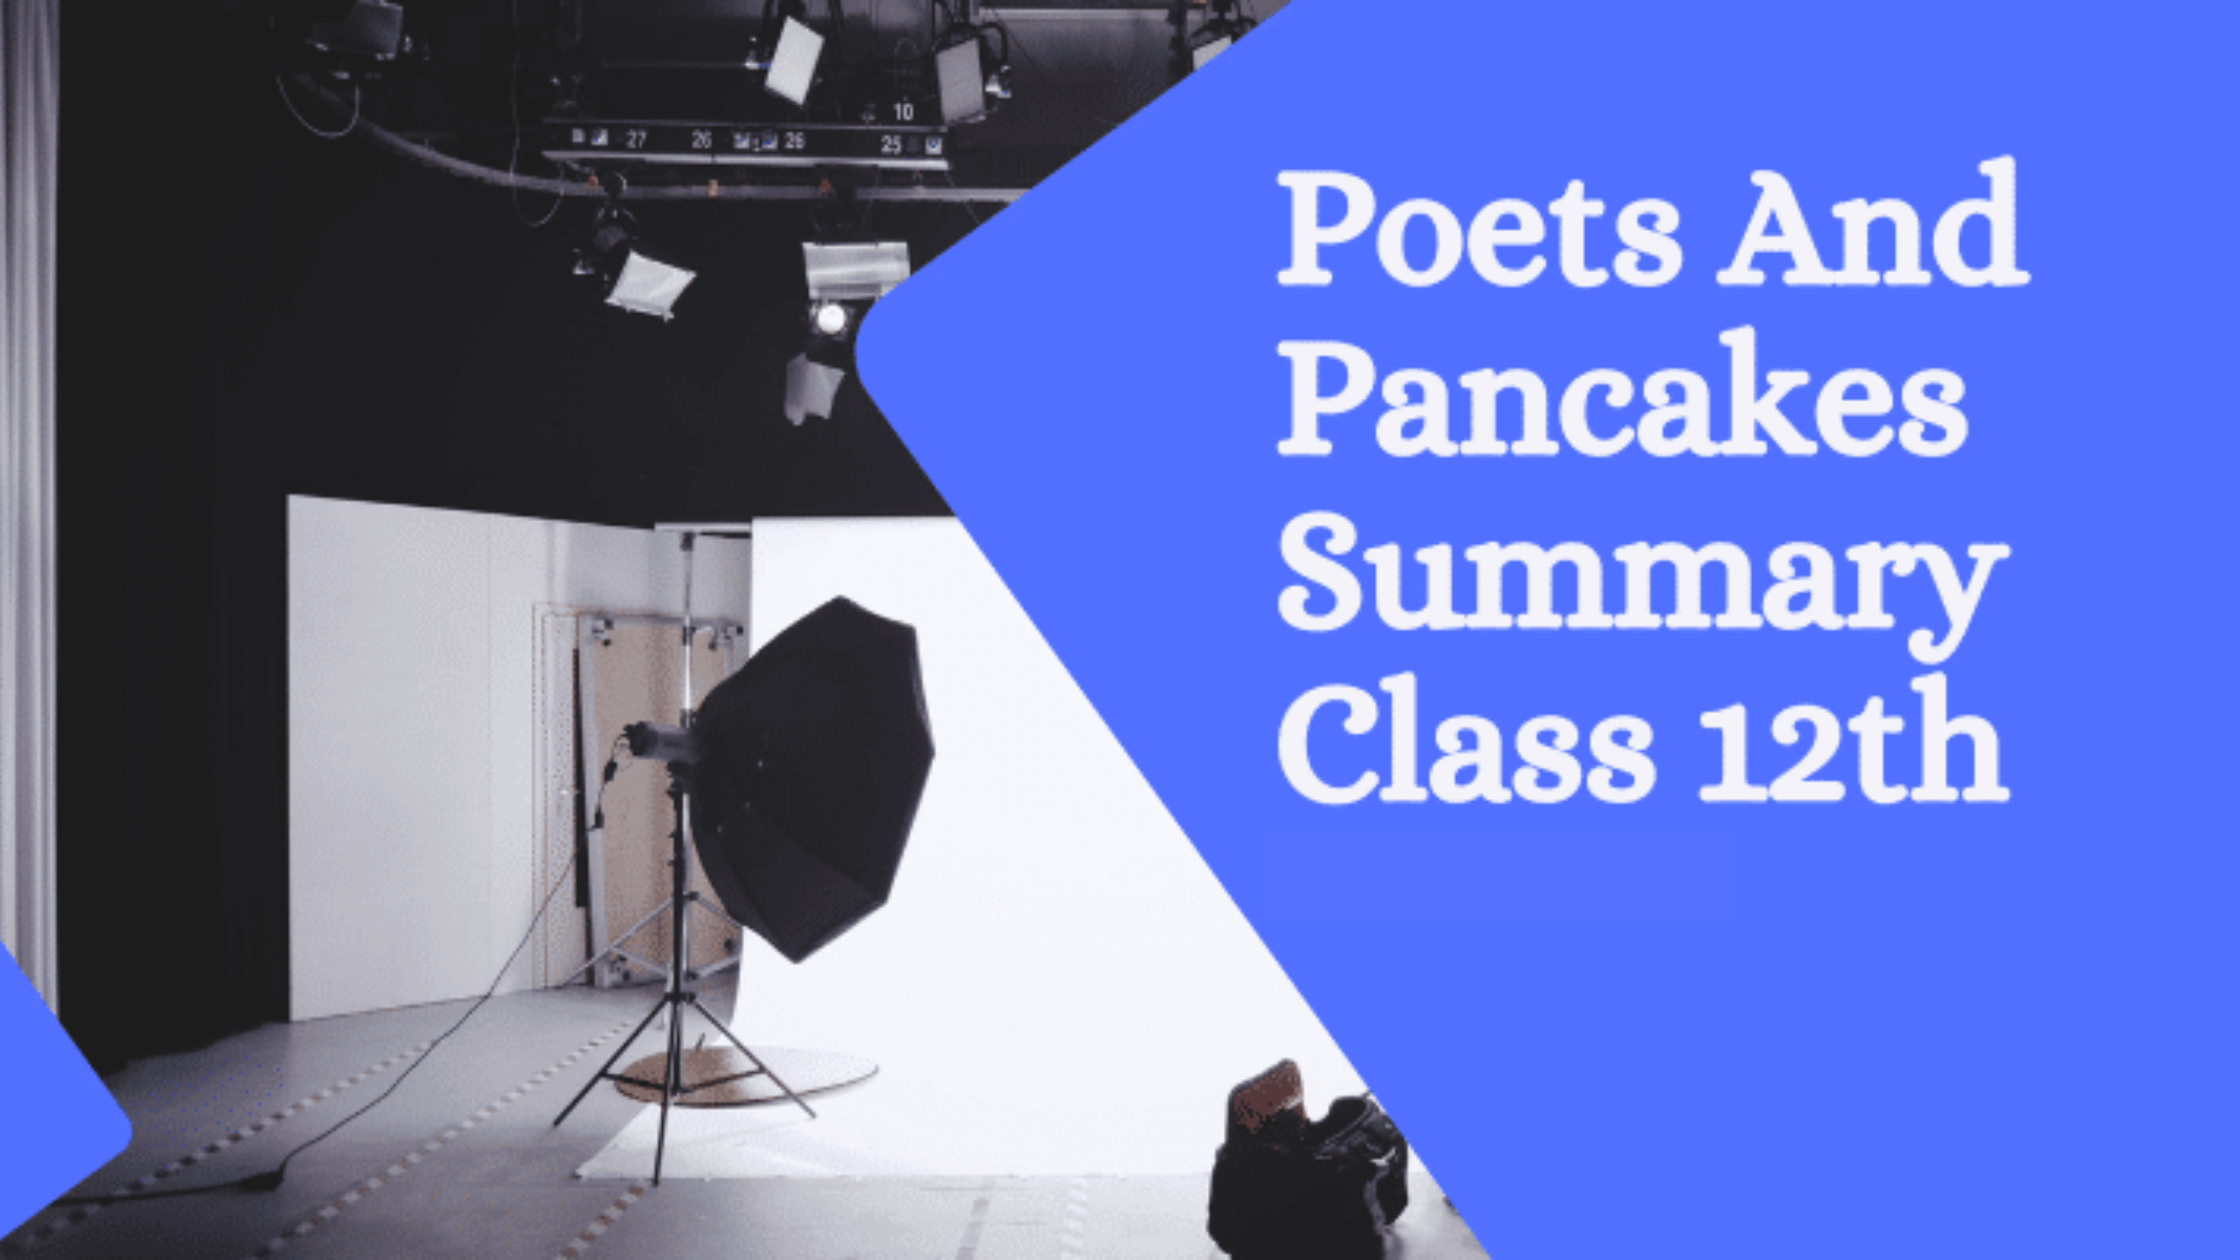 Poets And Pancakes Summary Class 12th